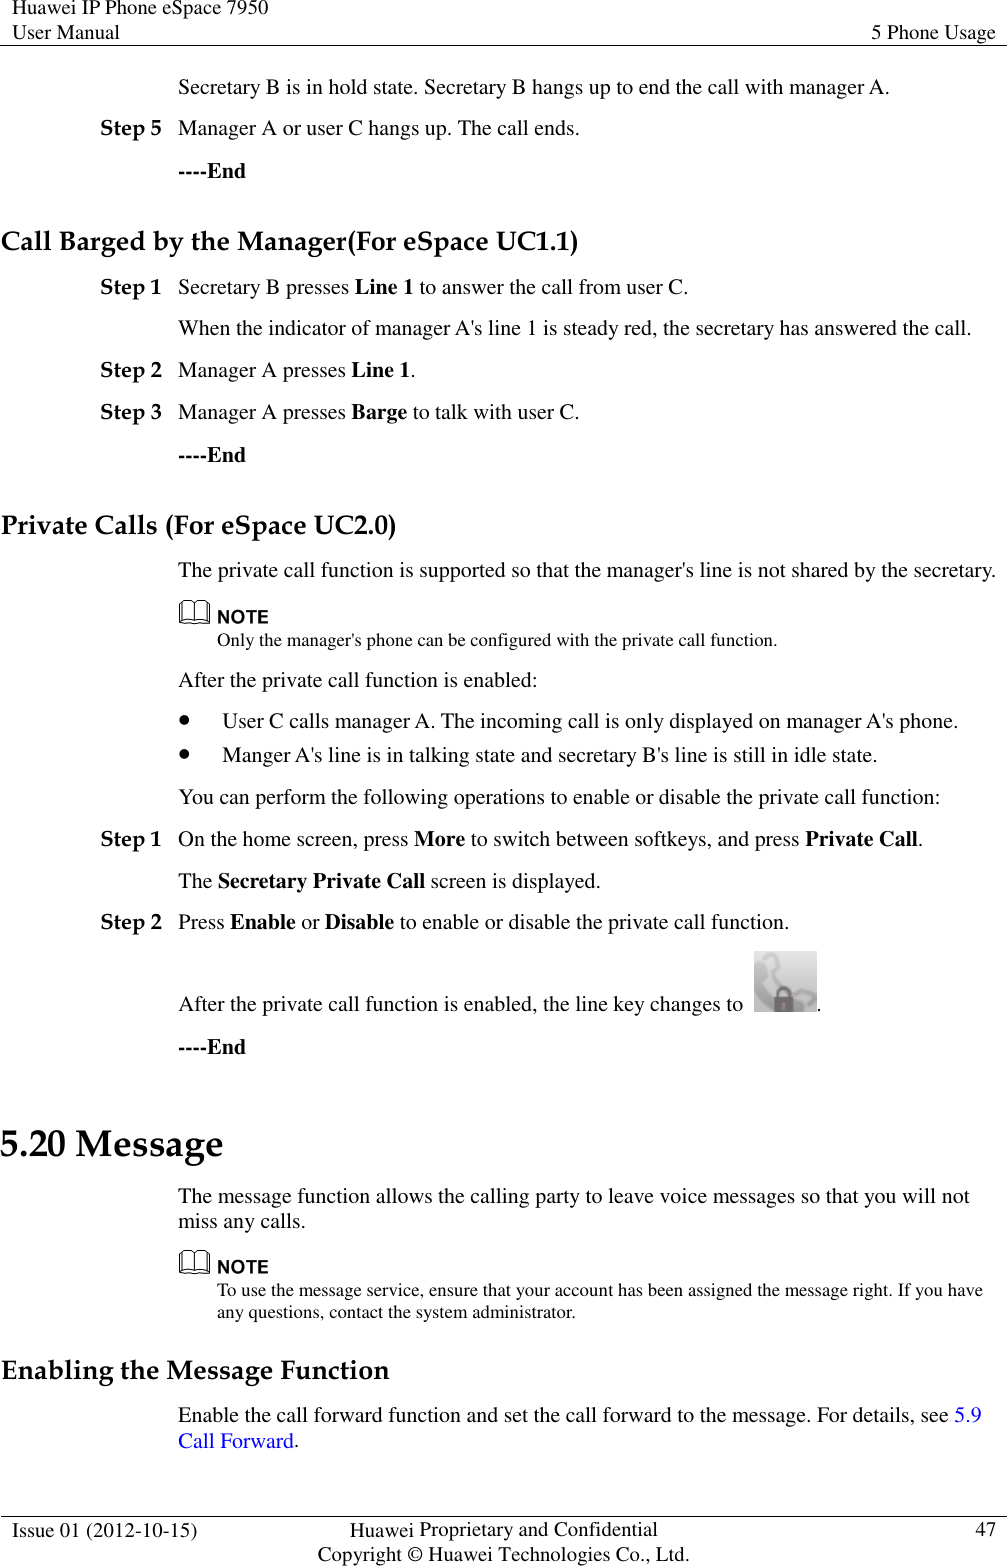 Huawei IP Phone eSpace 7950 User Manual  5 Phone Usage  Issue 01 (2012-10-15)  Huawei Proprietary and Confidential                                     Copyright © Huawei Technologies Co., Ltd.  47  Secretary B is in hold state. Secretary B hangs up to end the call with manager A. Step 5 Manager A or user C hangs up. The call ends. ----End Call Barged by the Manager(For eSpace UC1.1) Step 1 Secretary B presses Line 1 to answer the call from user C. When the indicator of manager A&apos;s line 1 is steady red, the secretary has answered the call. Step 2 Manager A presses Line 1. Step 3 Manager A presses Barge to talk with user C. ----End Private Calls (For eSpace UC2.0) The private call function is supported so that the manager&apos;s line is not shared by the secretary.  Only the manager&apos;s phone can be configured with the private call function. After the private call function is enabled:  User C calls manager A. The incoming call is only displayed on manager A&apos;s phone.  Manger A&apos;s line is in talking state and secretary B&apos;s line is still in idle state. You can perform the following operations to enable or disable the private call function: Step 1 On the home screen, press More to switch between softkeys, and press Private Call. The Secretary Private Call screen is displayed. Step 2 Press Enable or Disable to enable or disable the private call function. After the private call function is enabled, the line key changes to  . ----End 5.20 Message The message function allows the calling party to leave voice messages so that you will not miss any calls.  To use the message service, ensure that your account has been assigned the message right. If you have any questions, contact the system administrator. Enabling the Message Function Enable the call forward function and set the call forward to the message. For details, see 5.9 Call Forward. 